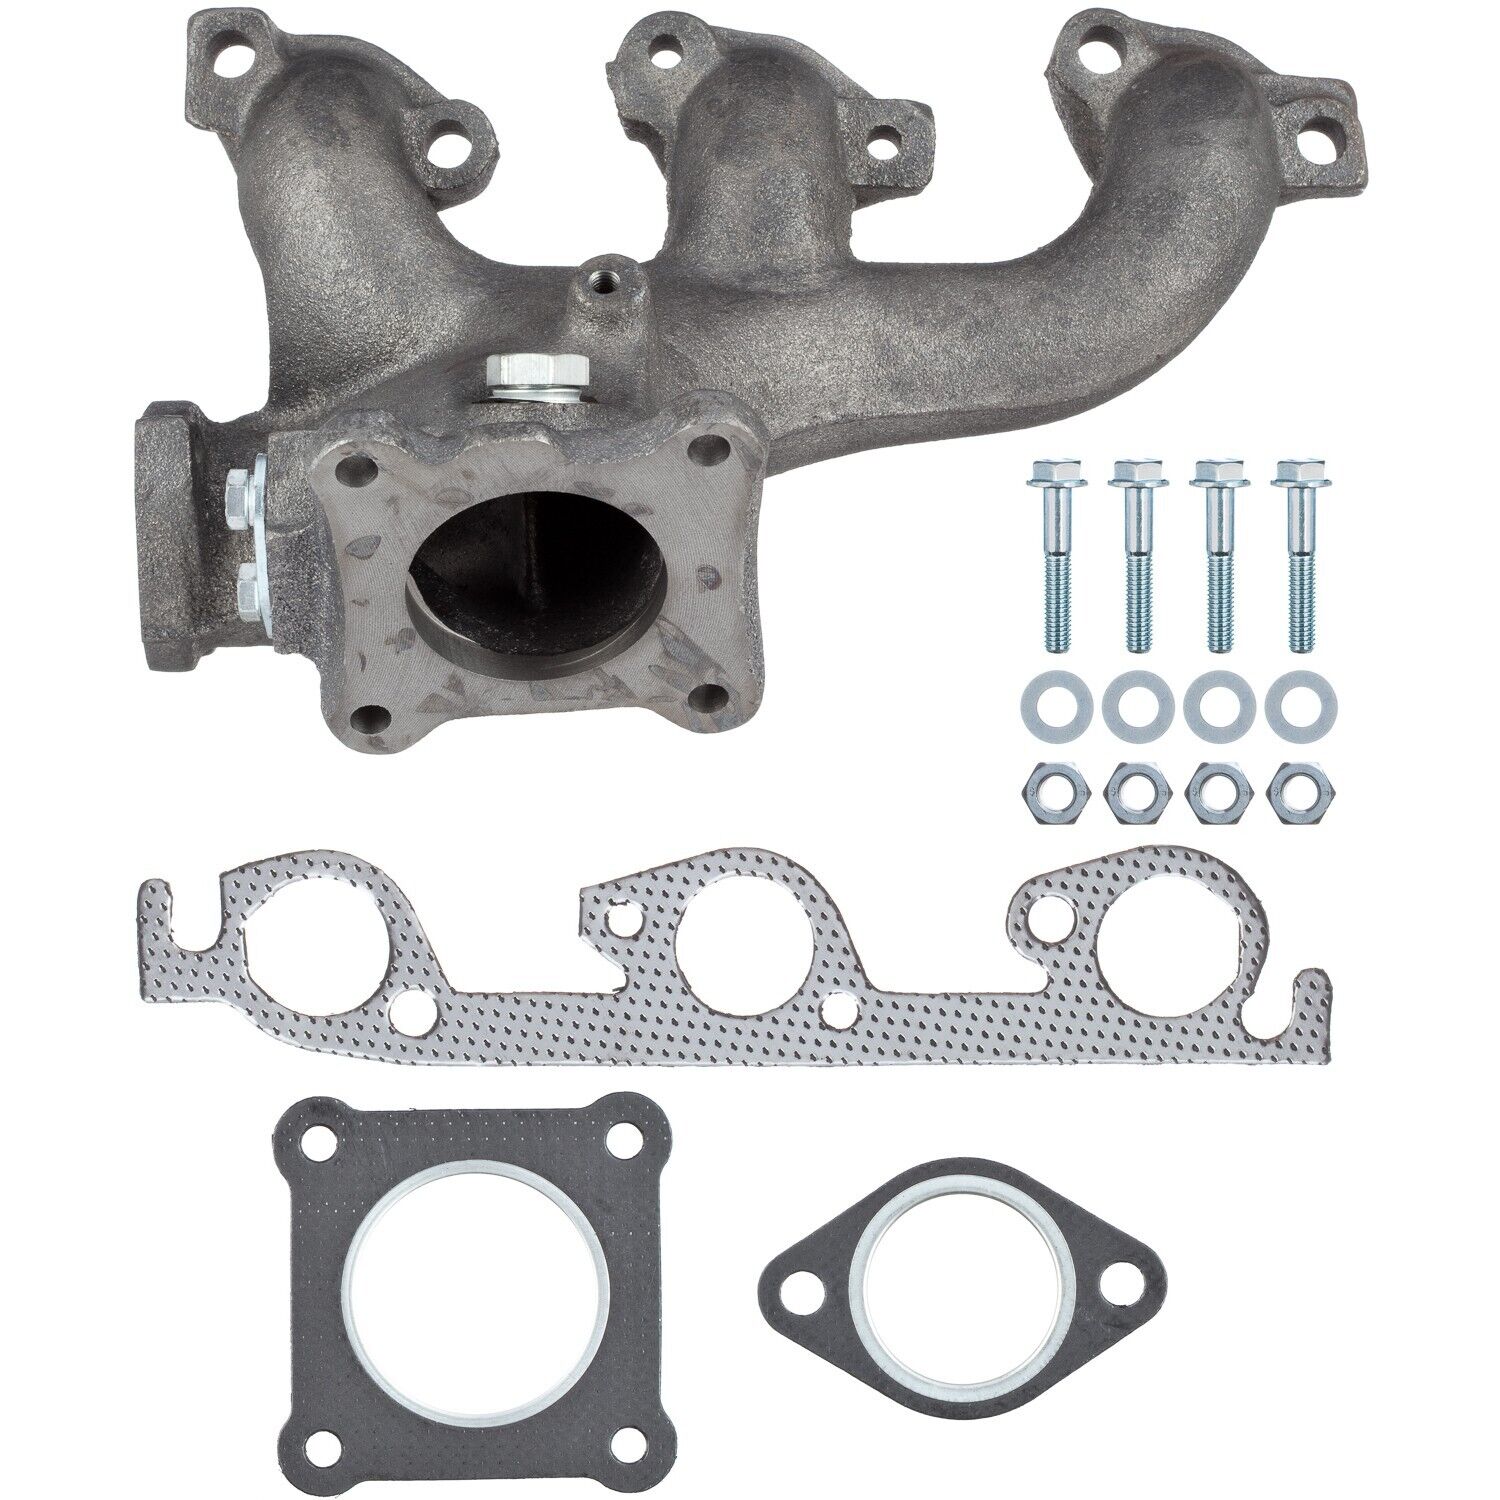 Exhaust Manifold for Grand Voyager, Town & Country, Voyager, Caravan+More 101257